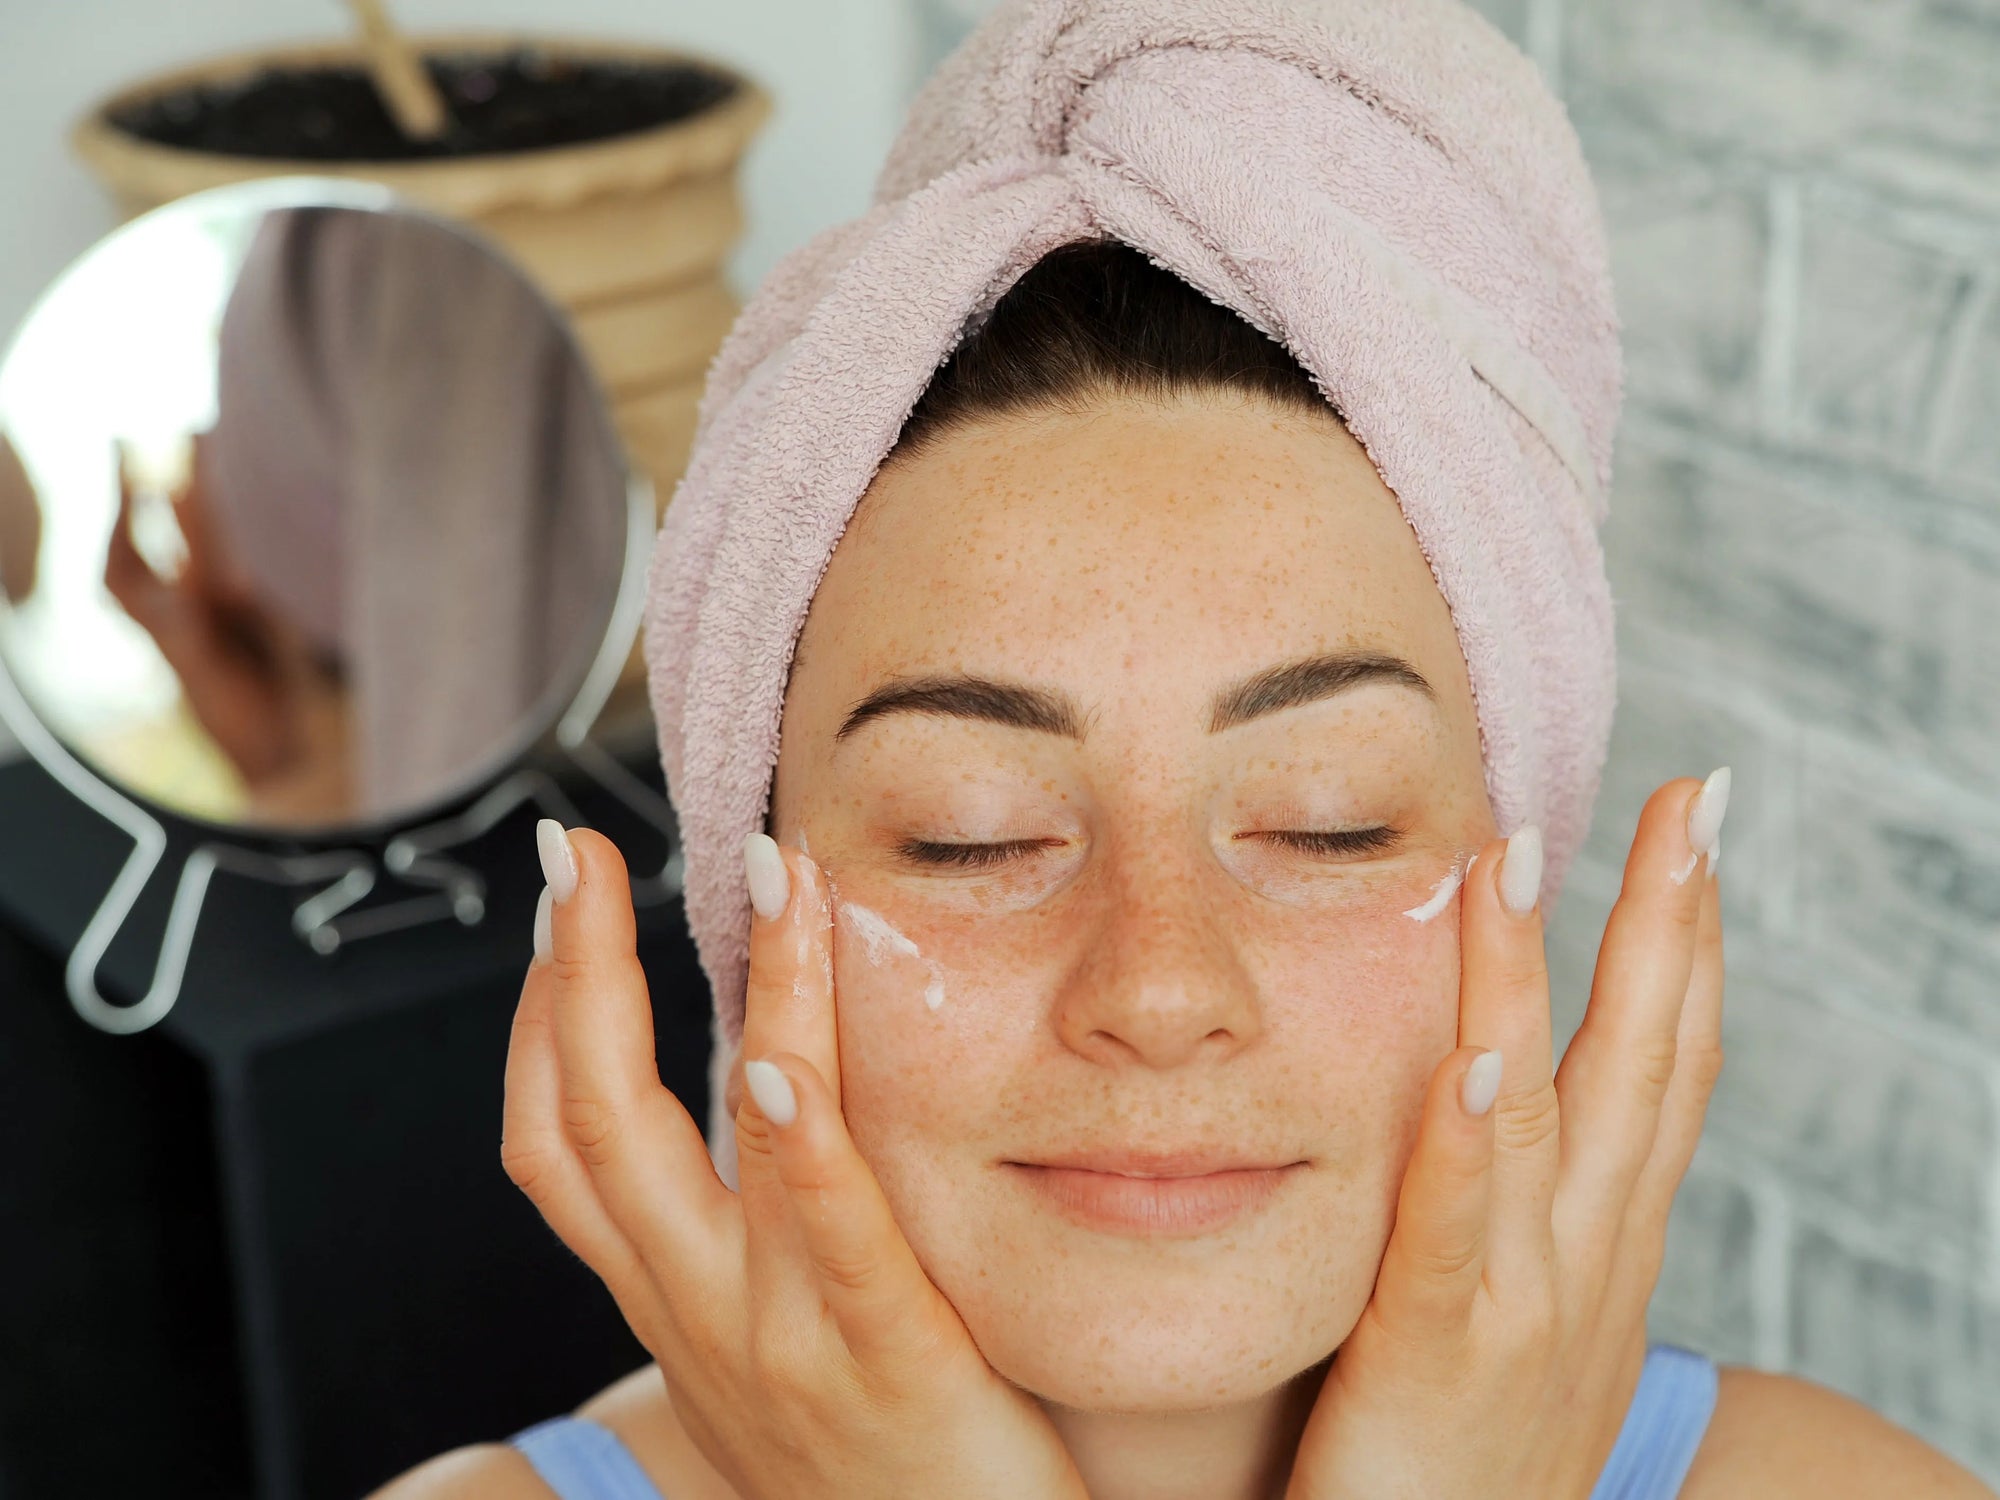 How to Build an Easy Skin Care Routine - snowyskinco